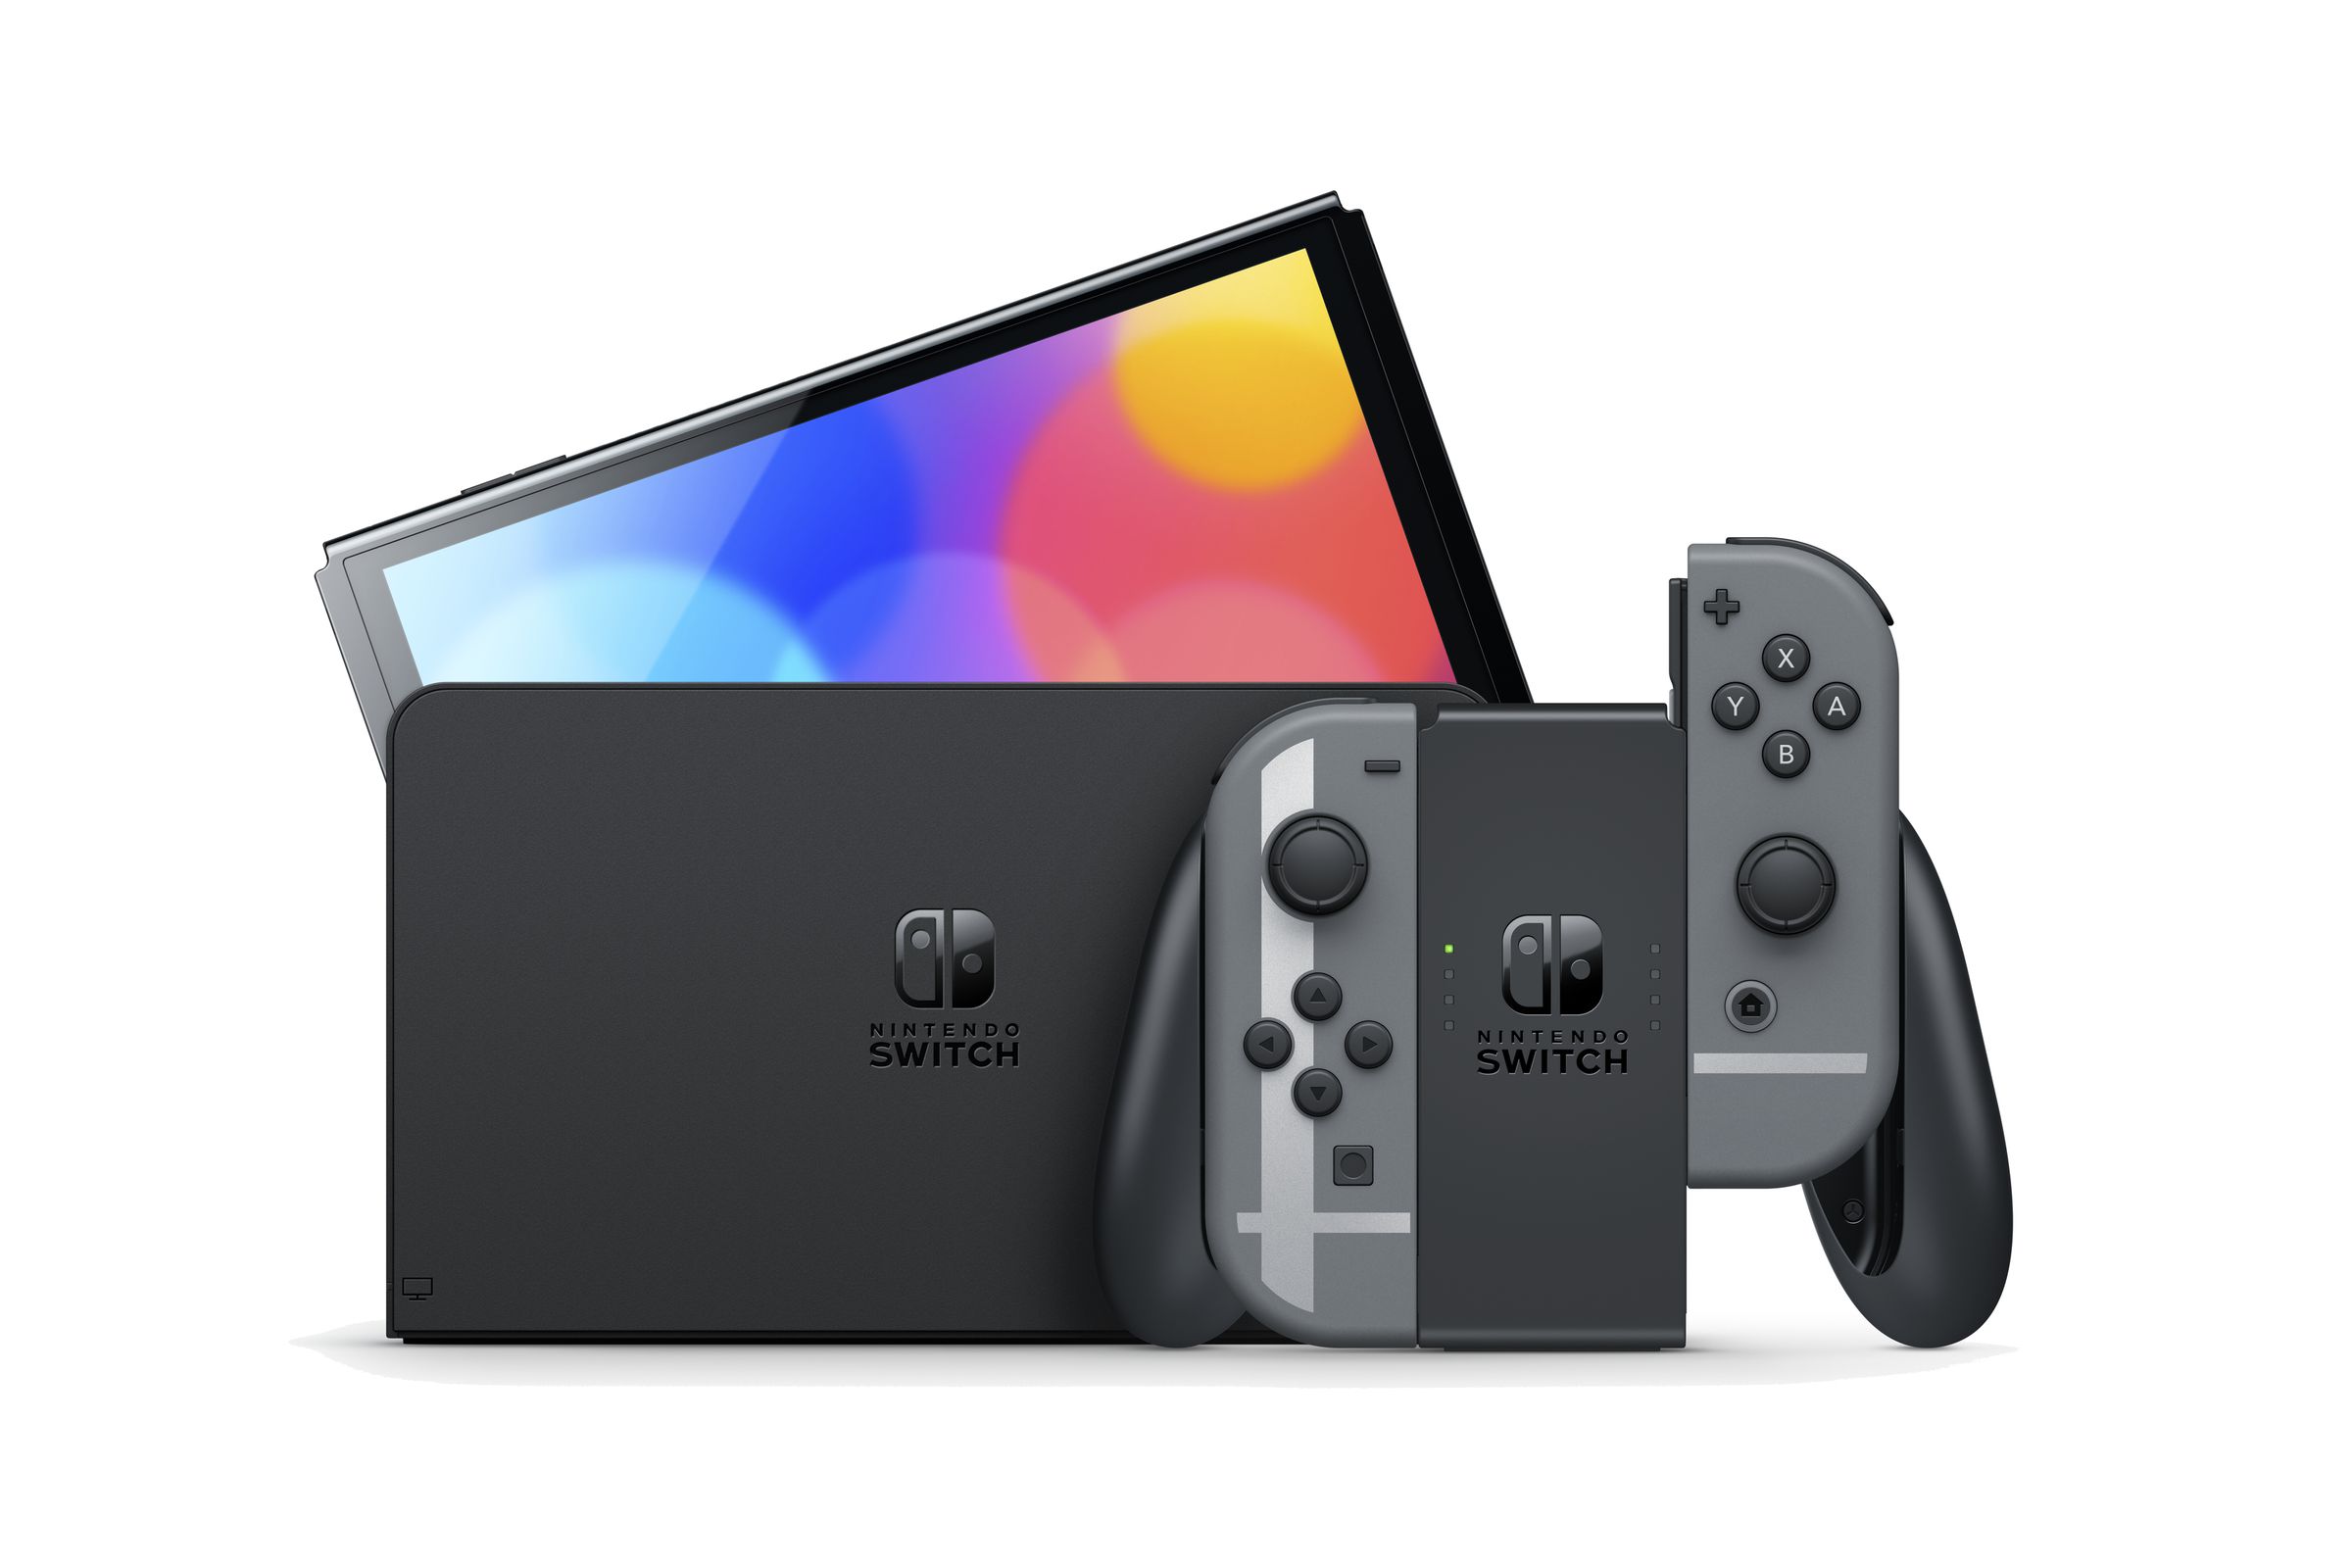 An image of a OLED Nintendo Switch with Smash Bros.-themed controllers